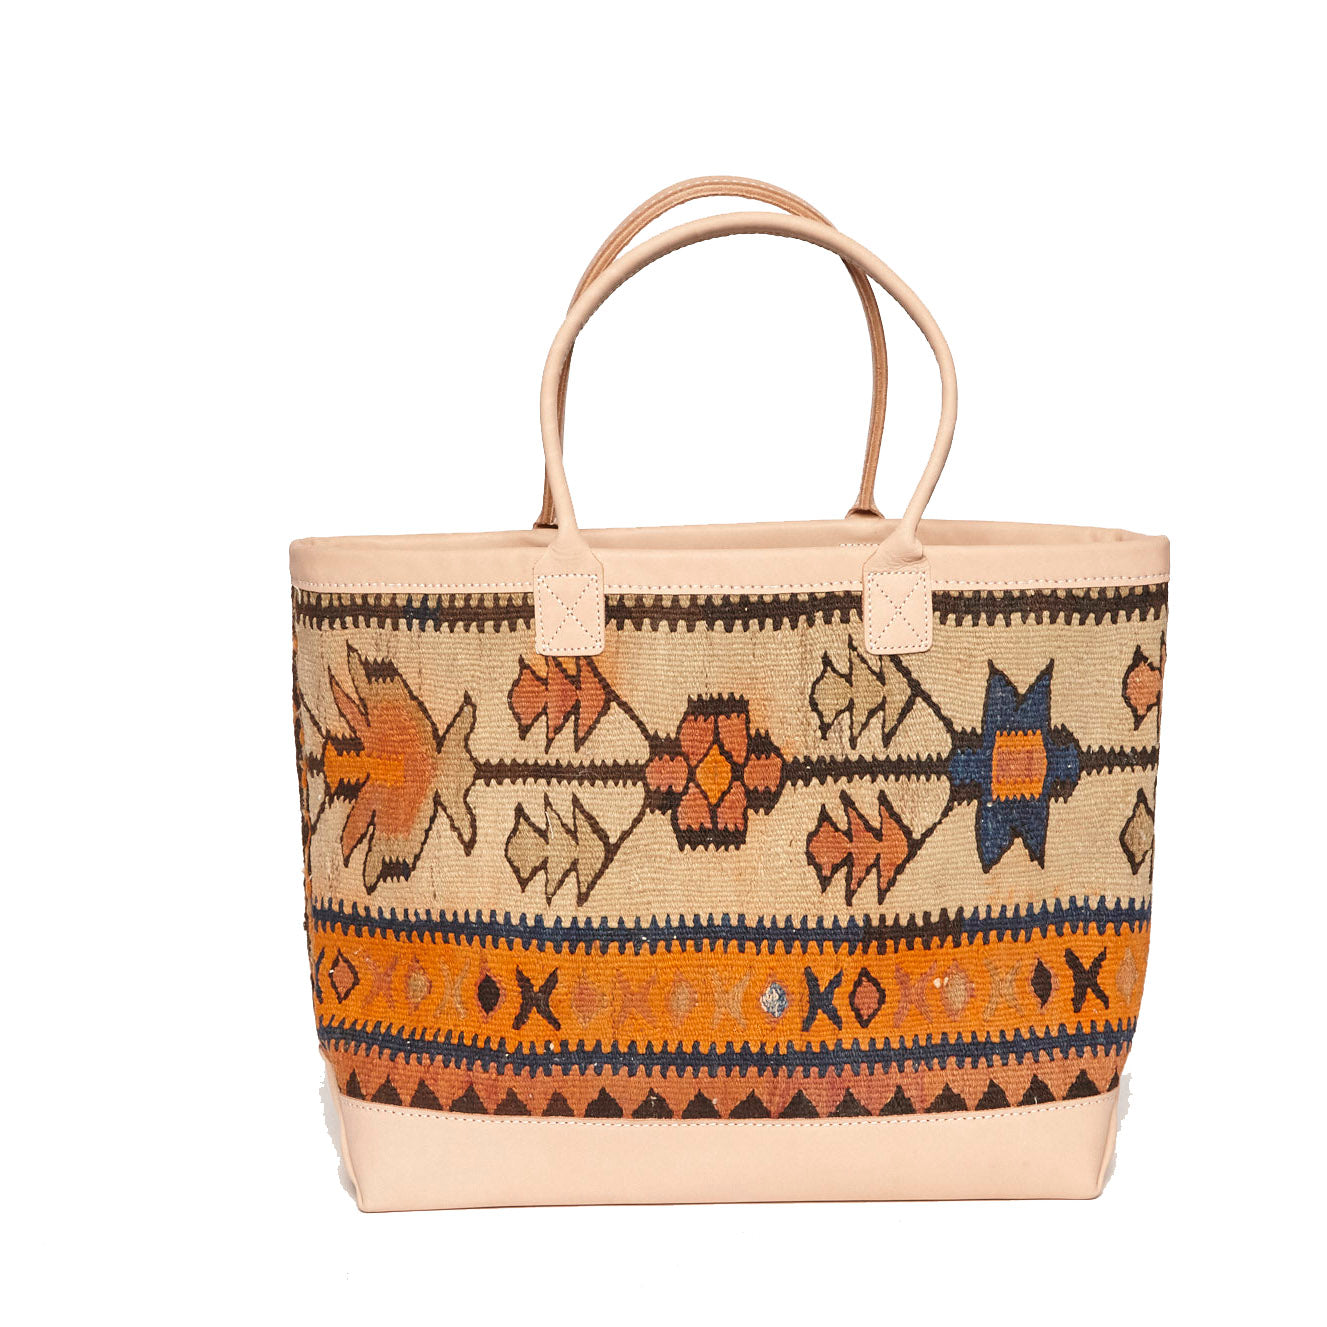 One of a kind King Kennedy Rug tote with orange, cream, blue floral flatweave pattern. With pale beige leather handle and boot. Perfect for running around the city all day or a jaunt to the farmers market